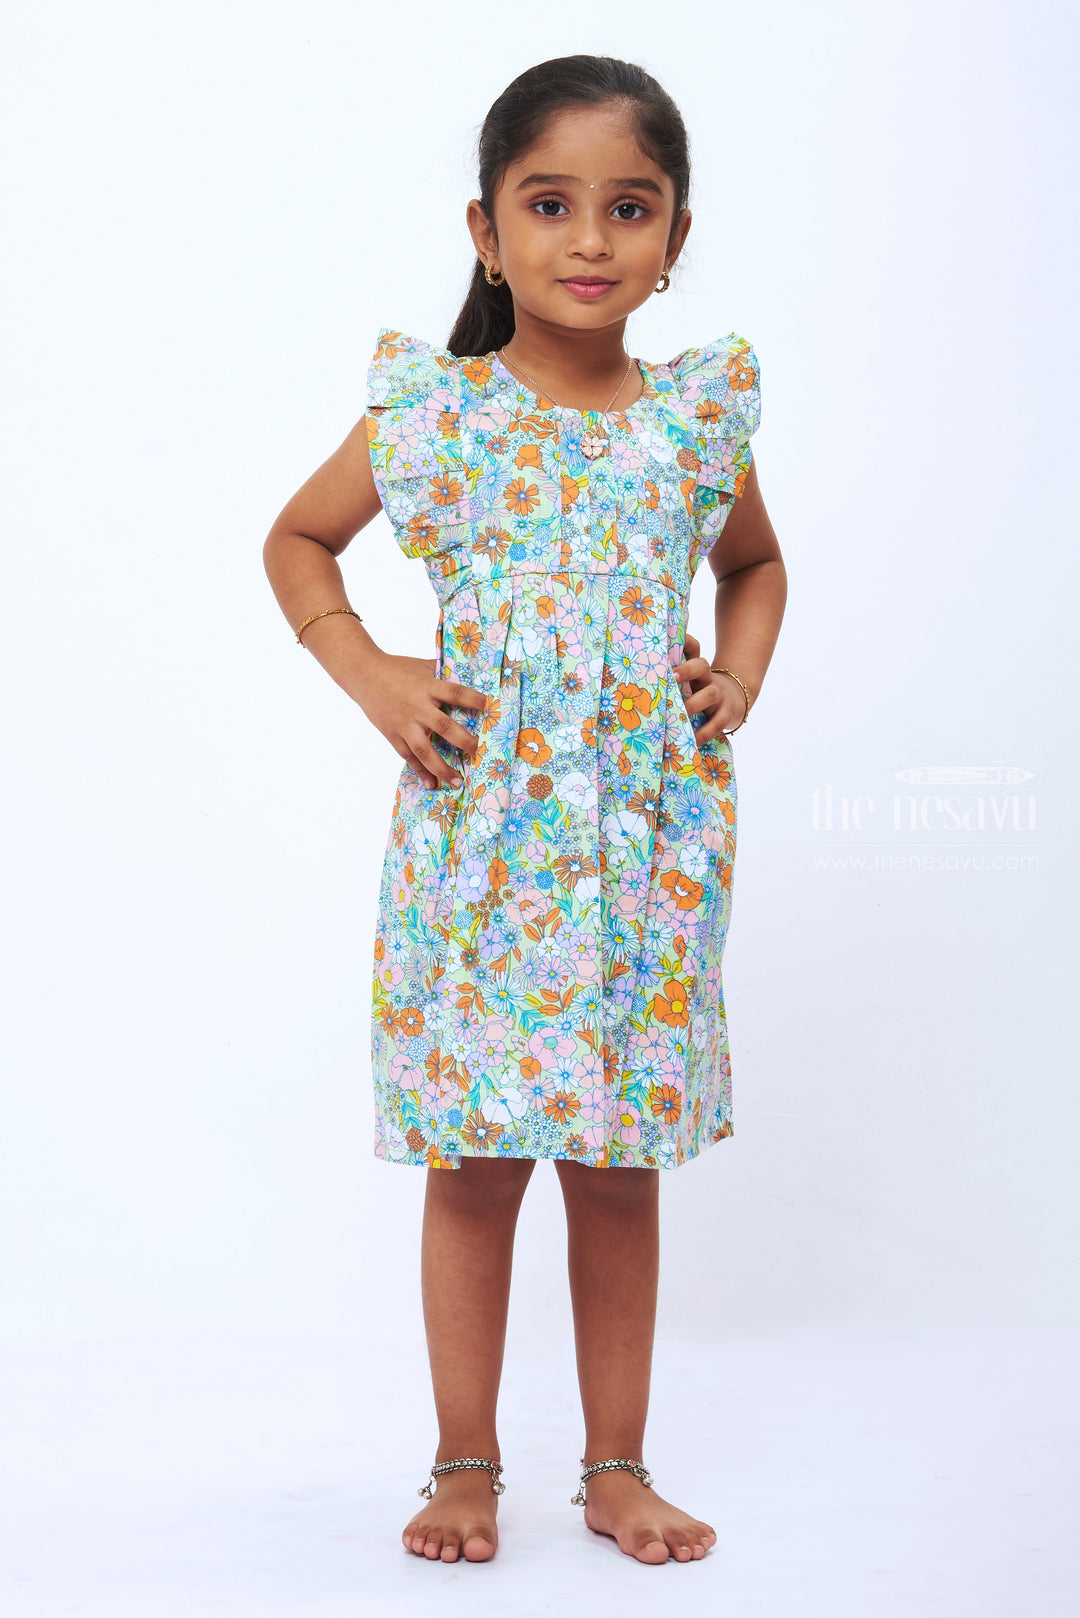 The Nesavu Girls Cotton Frock Blossoming Meadow Cotton Frock Frill Accent & Pleated Detail for Girls Nesavu 14 (6M) / Green / Cotton GFC1223C-14 Girls Floral Pleated Dress | Summer Blossom Cotton Frock with Frills | The Nesavu